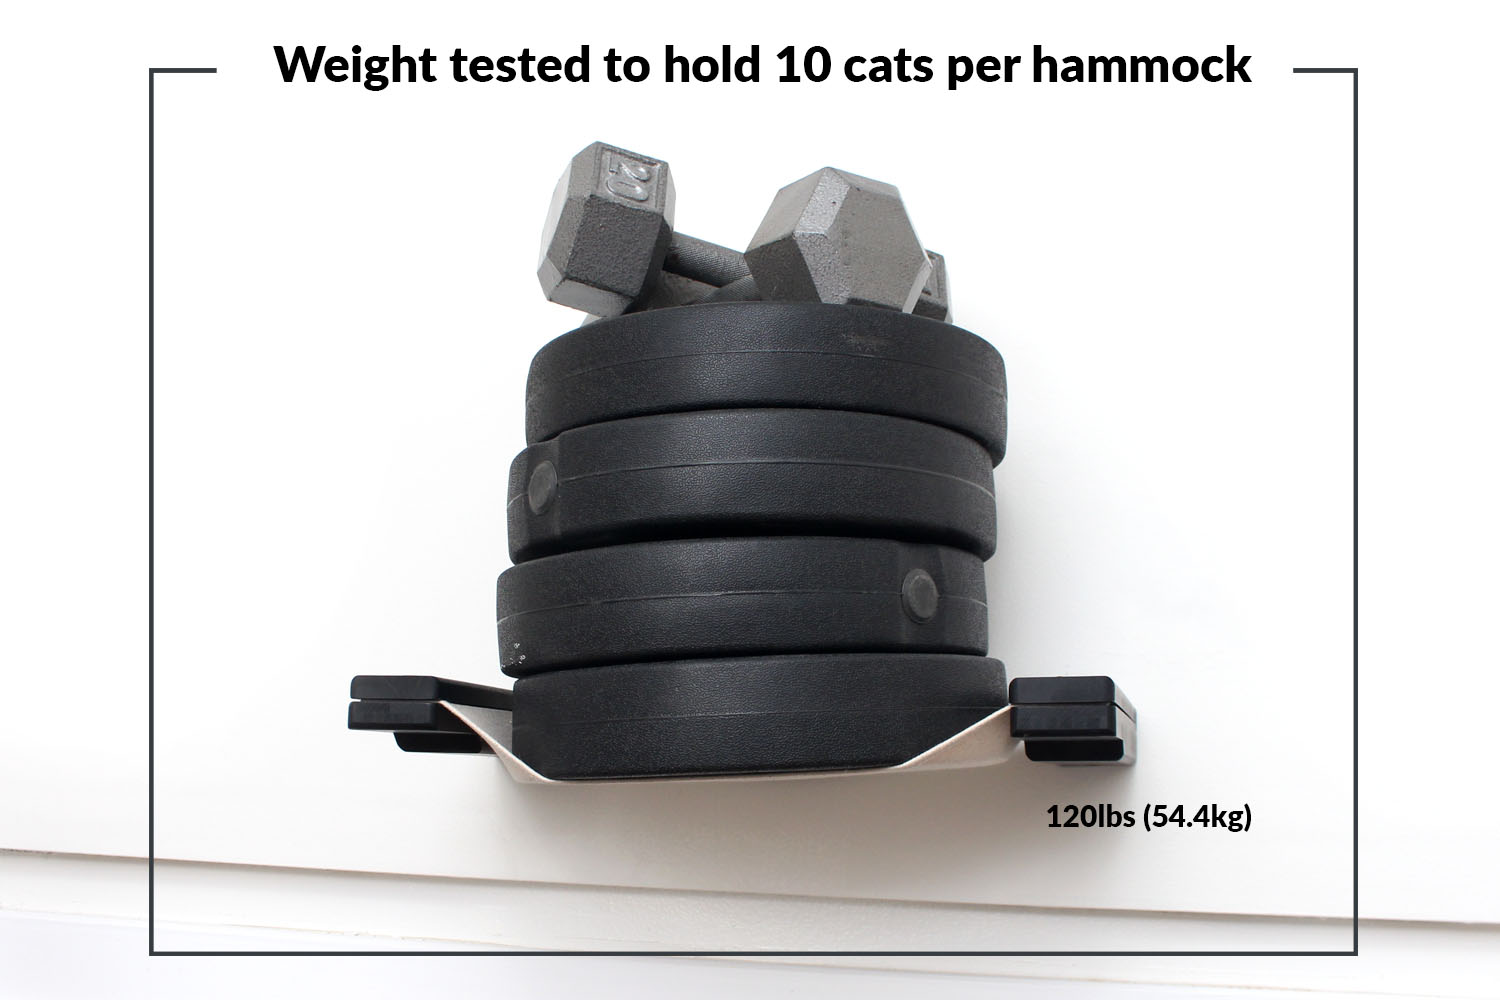 This photo displays a weight test on one of the Cat Lounges. This weight test shows the hammock holding 120lbs (54.4kg).